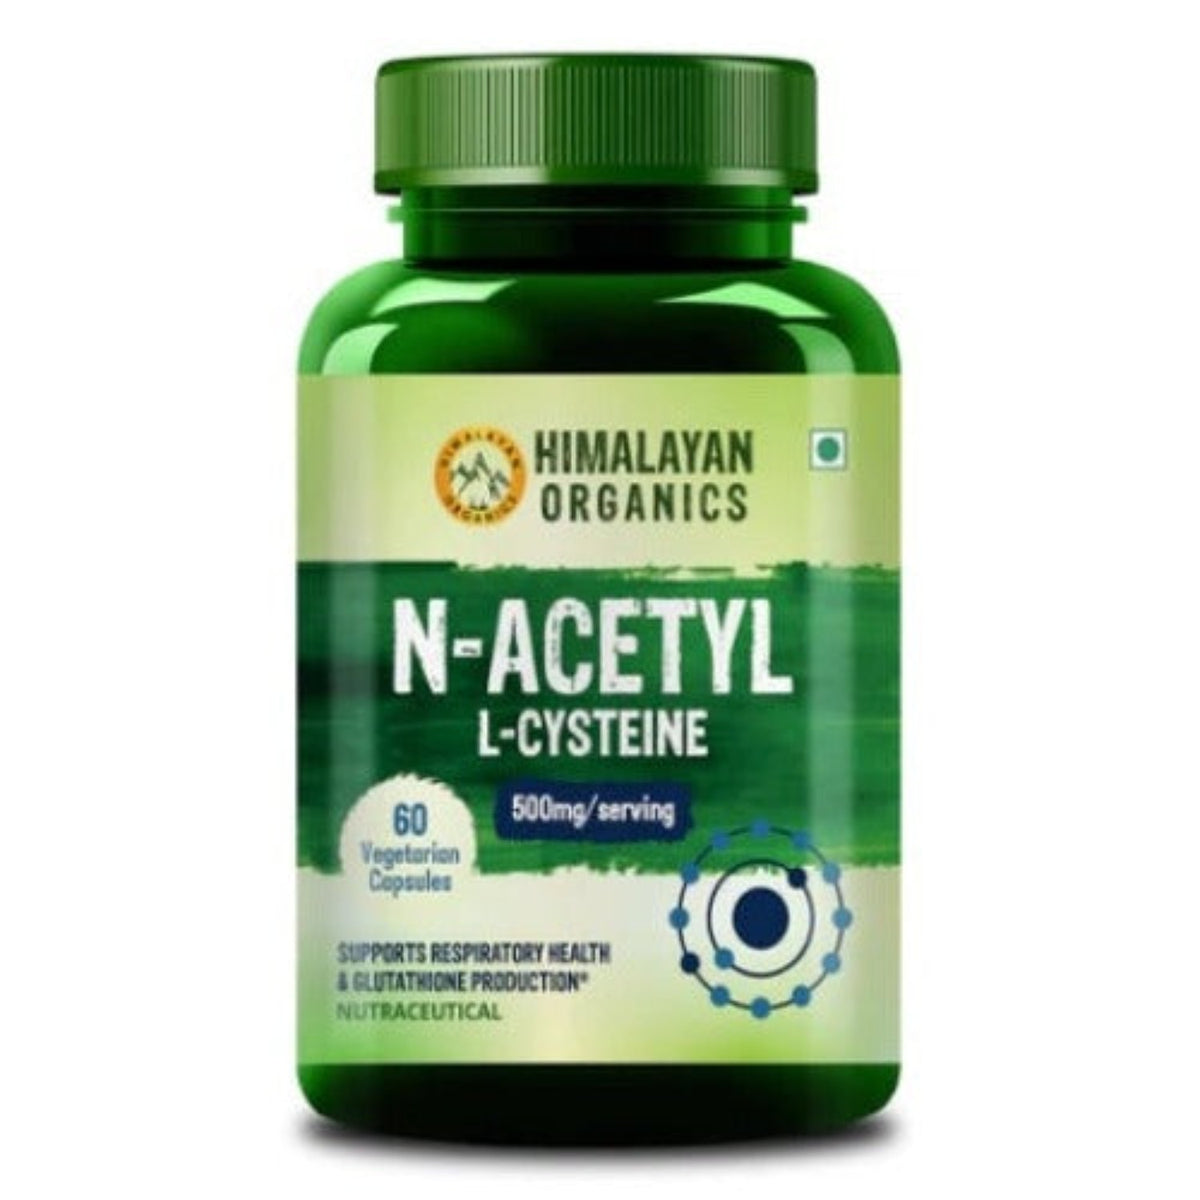 Himalayan Organics N-Acetyl L-Cysteine Non-GMO Gluten-Free Supports Respiratory Health & Gluthathione Production (60 Capsules)